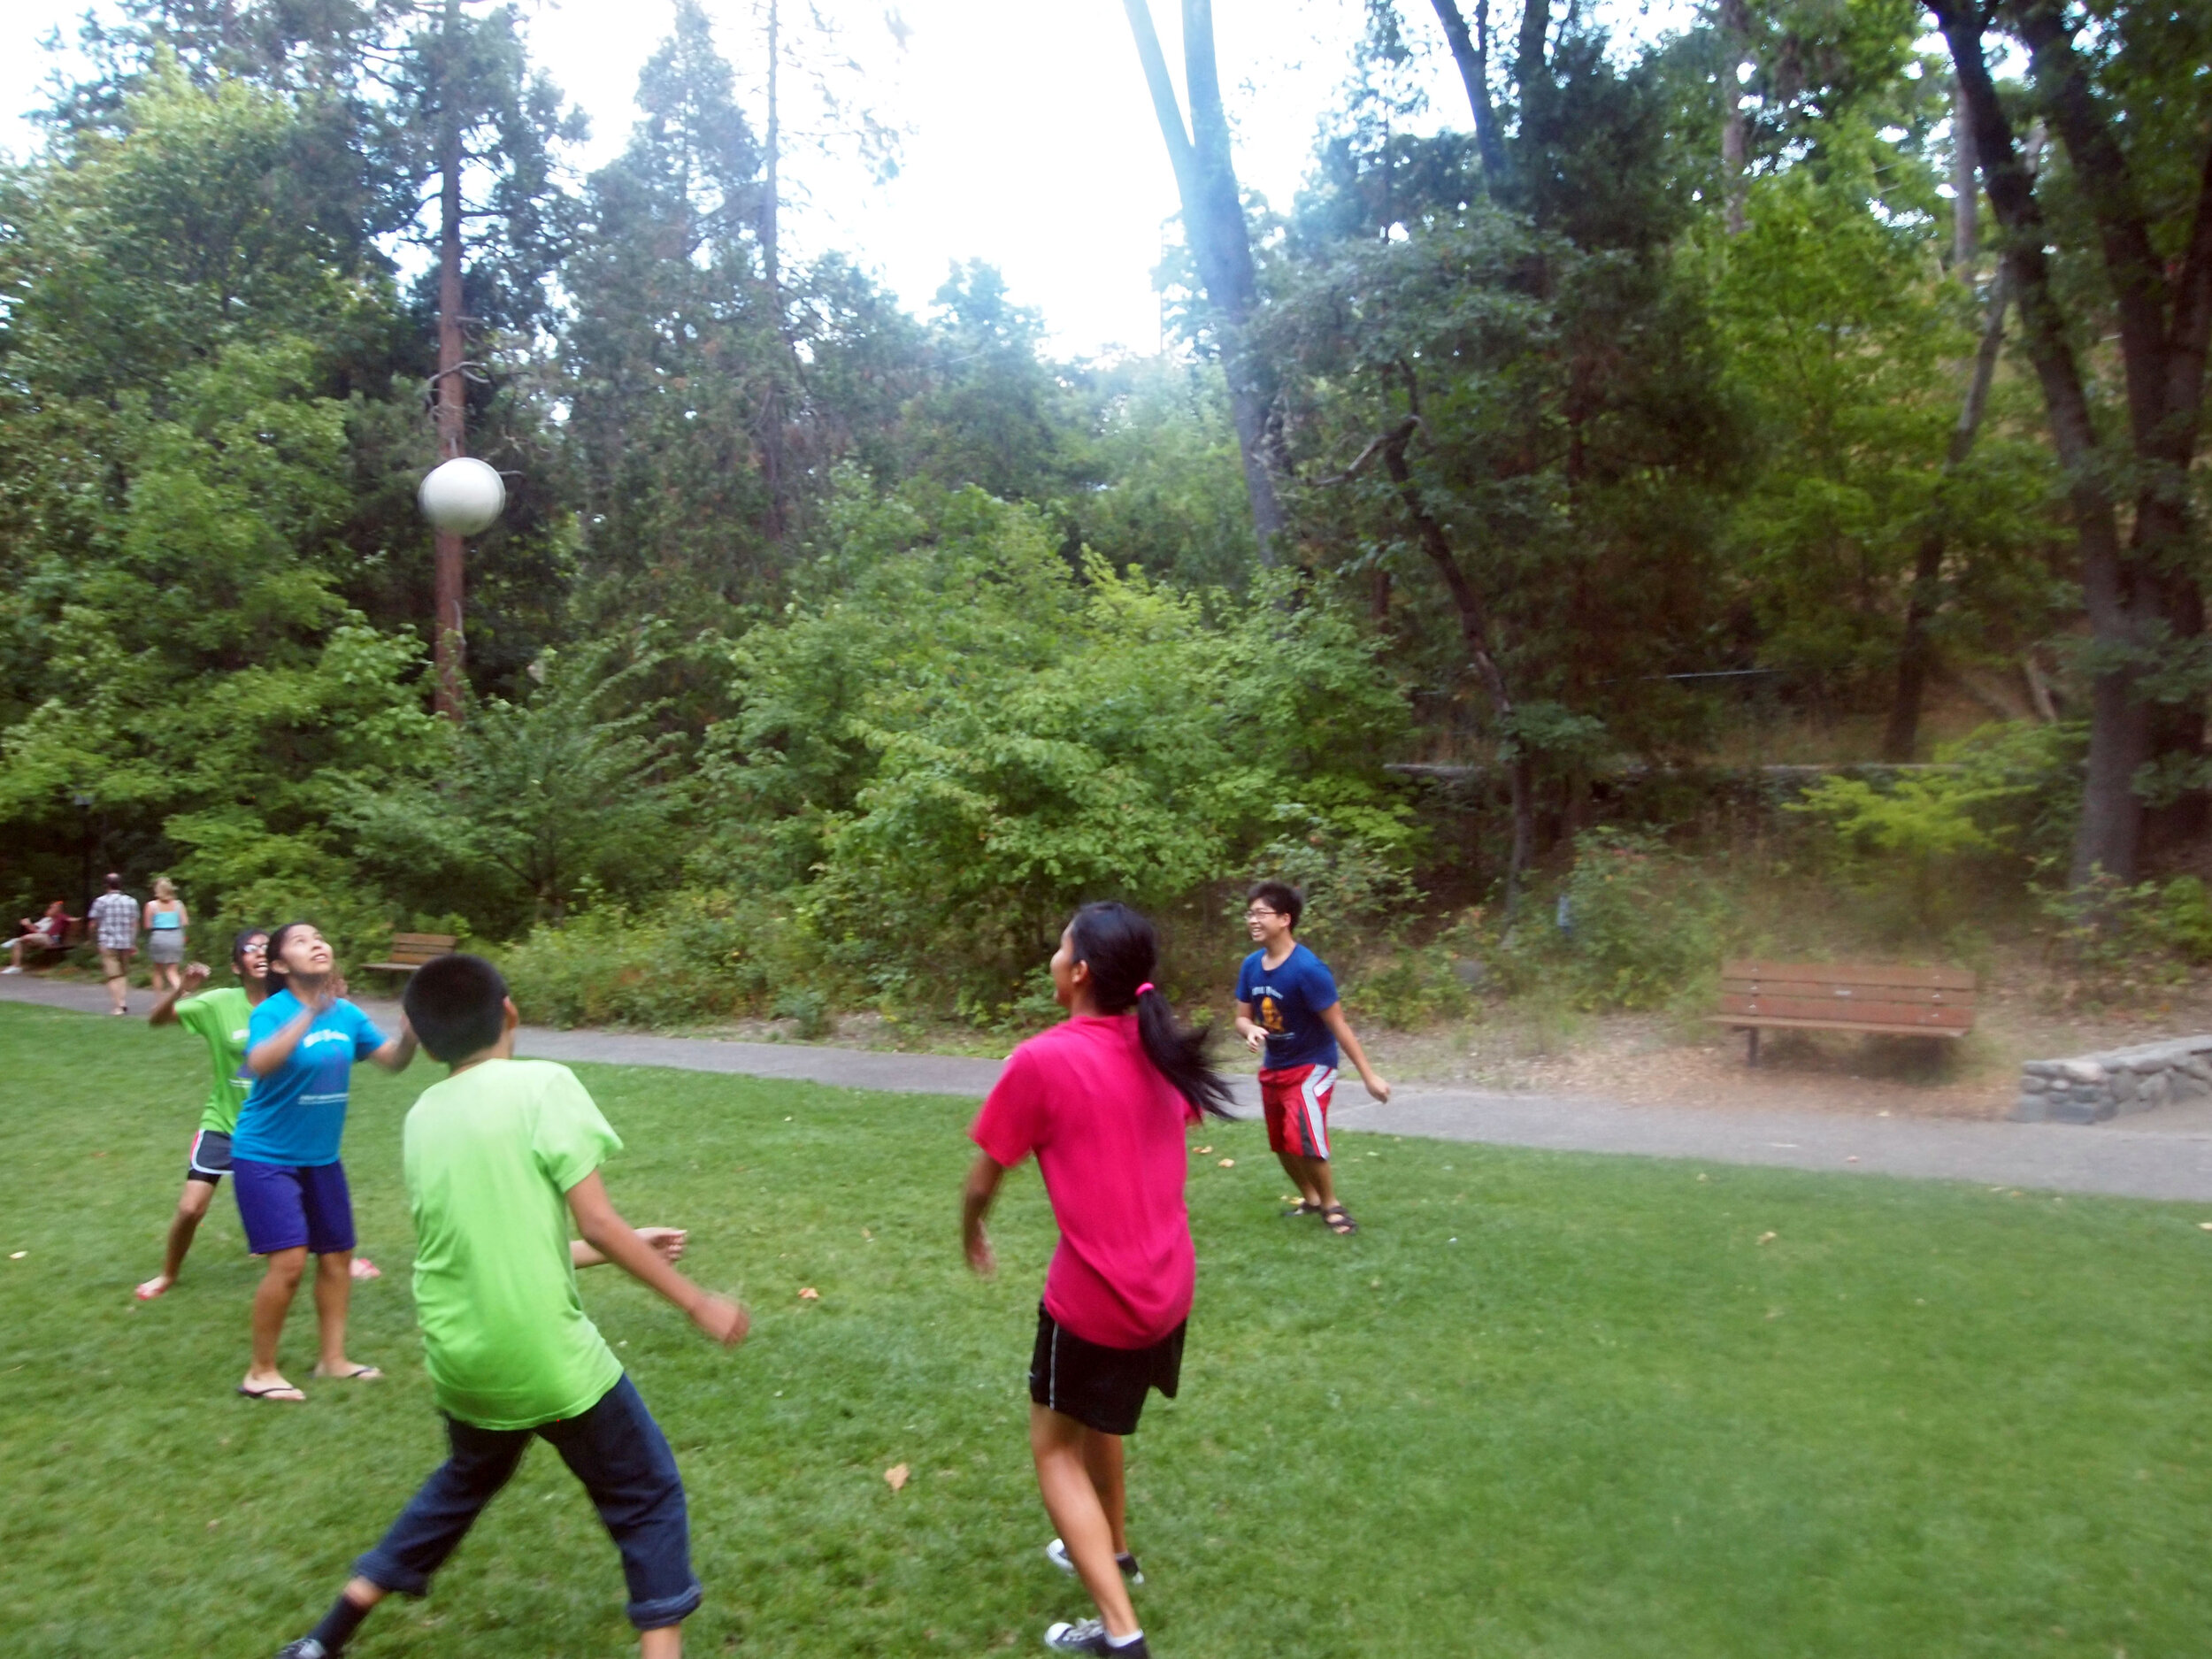  Summer Nights, Volleyball, and Lithia Park 